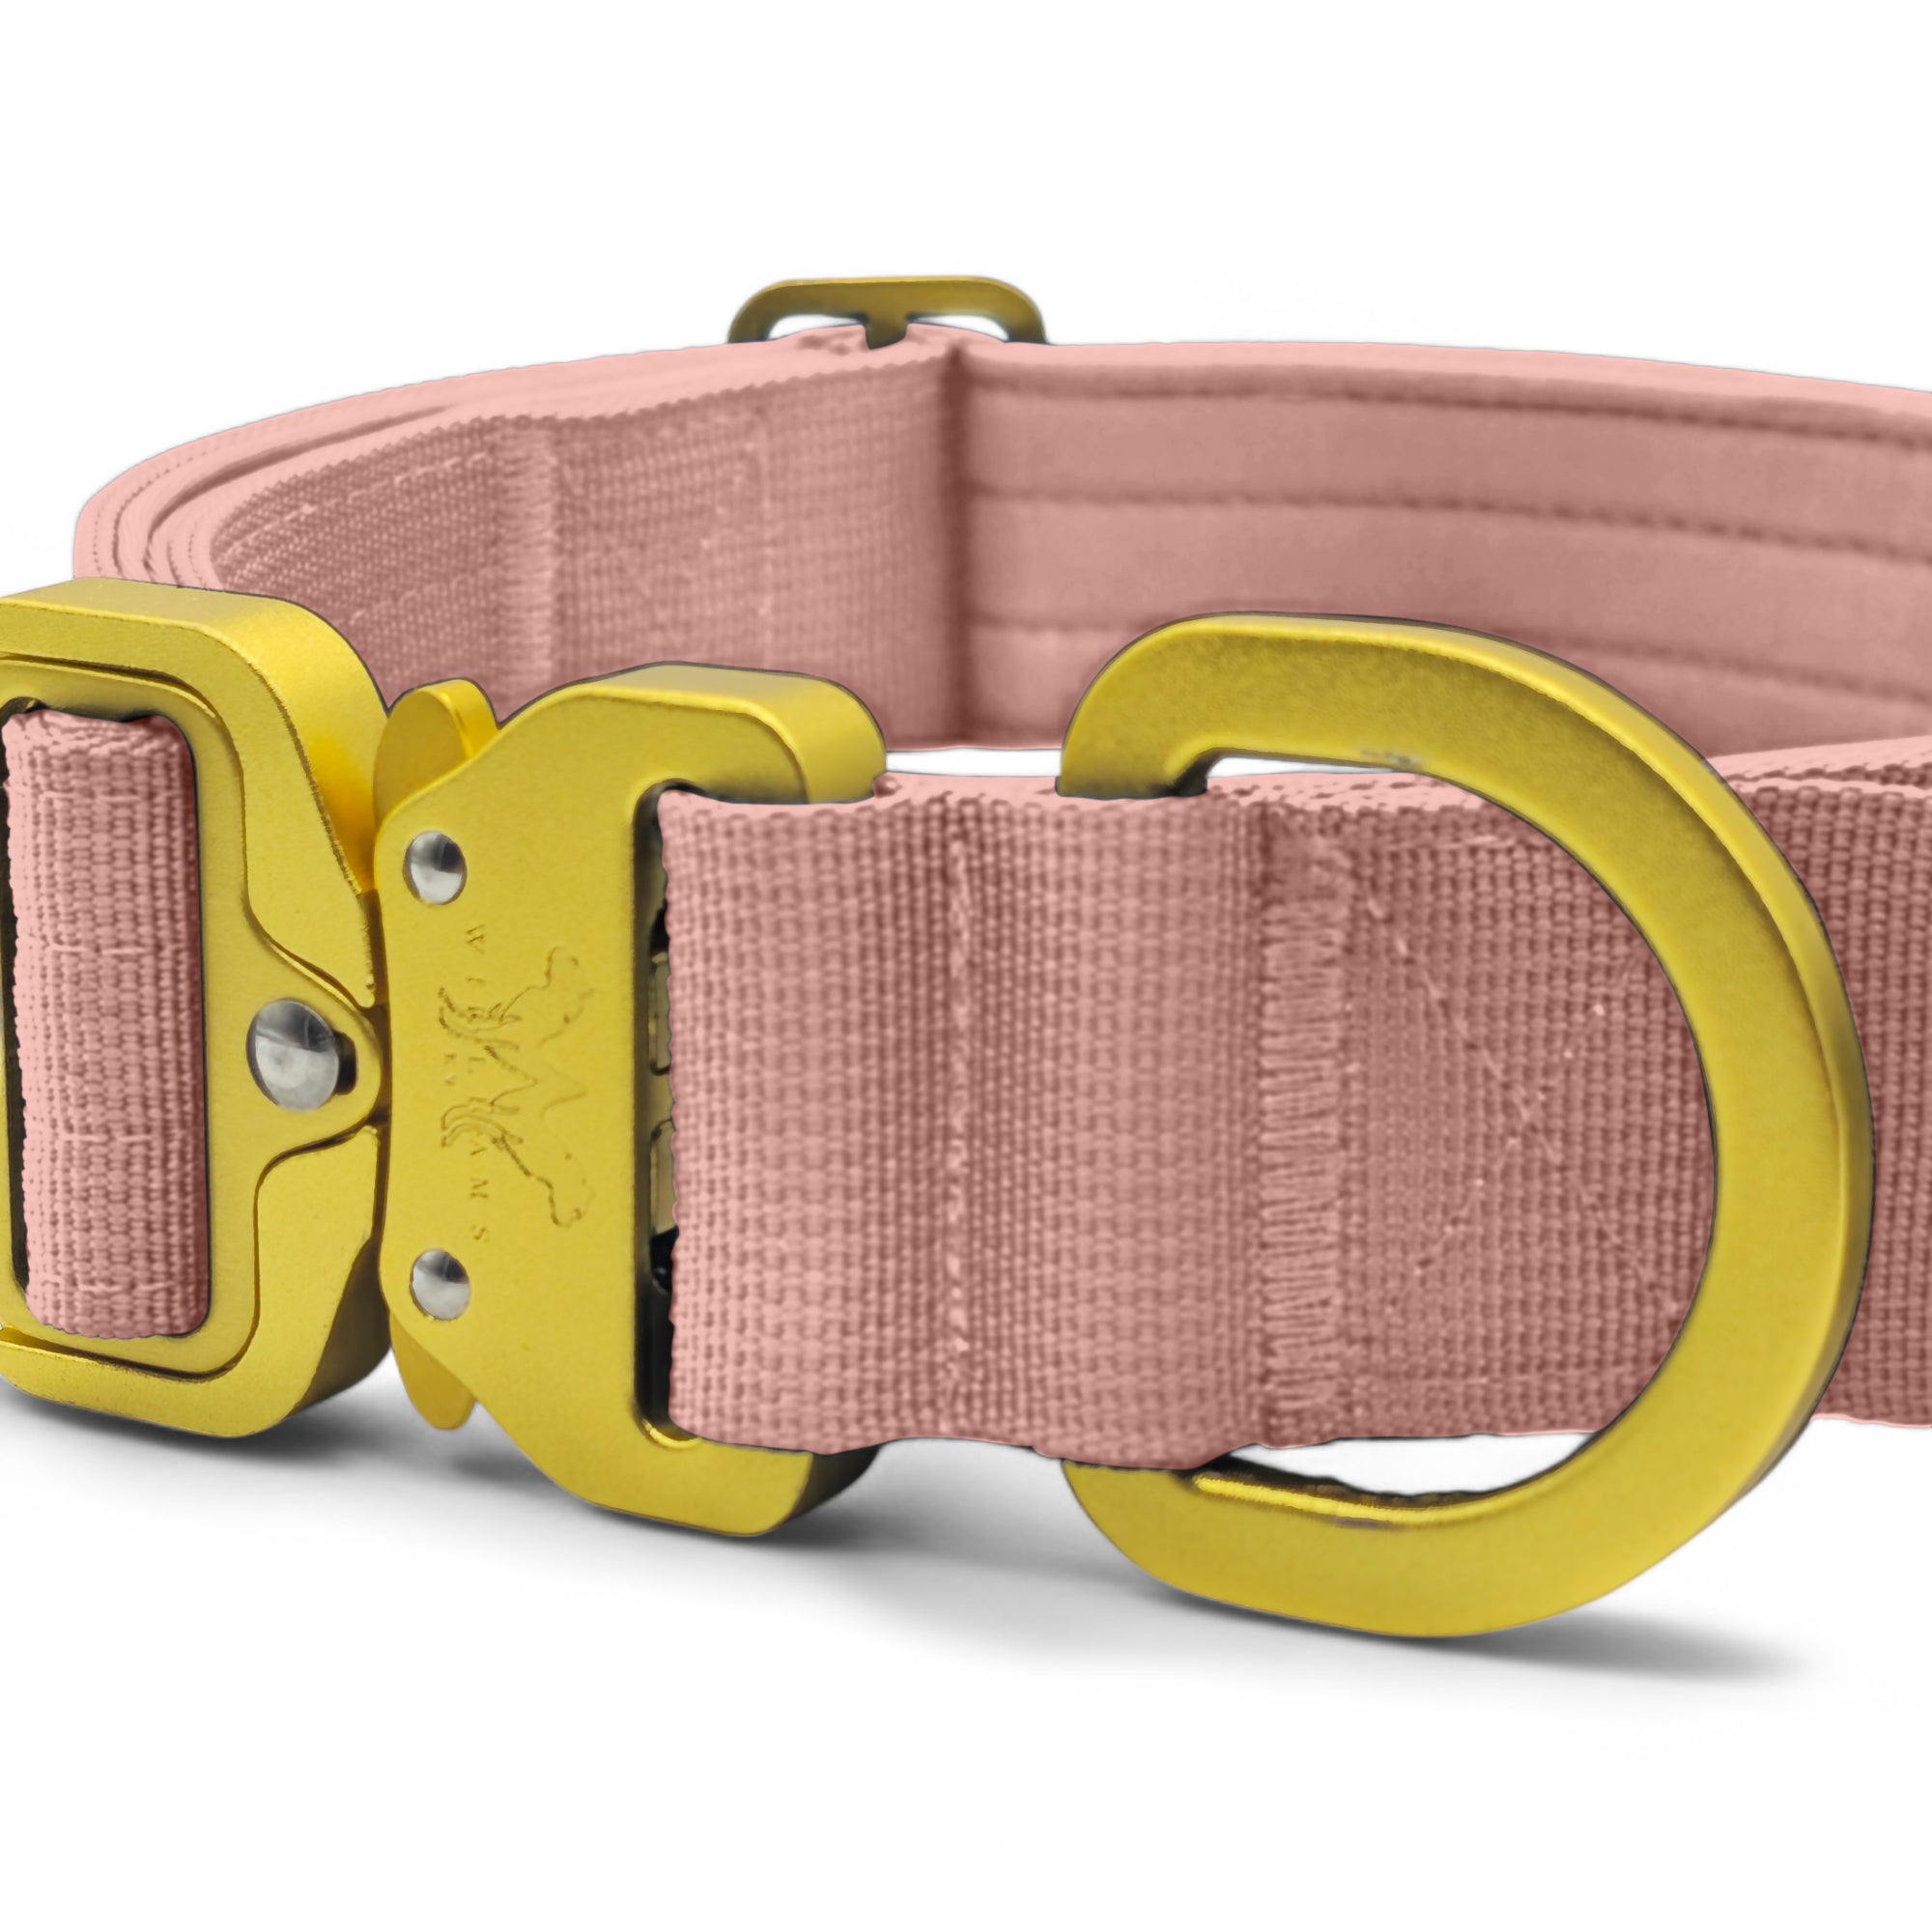 Light Tactical Collar 4CM Soft Pink | Quad Stitched Nylon Lightweight Gold Aluminium Buckle + D Ring Adjustable Collar With Handle